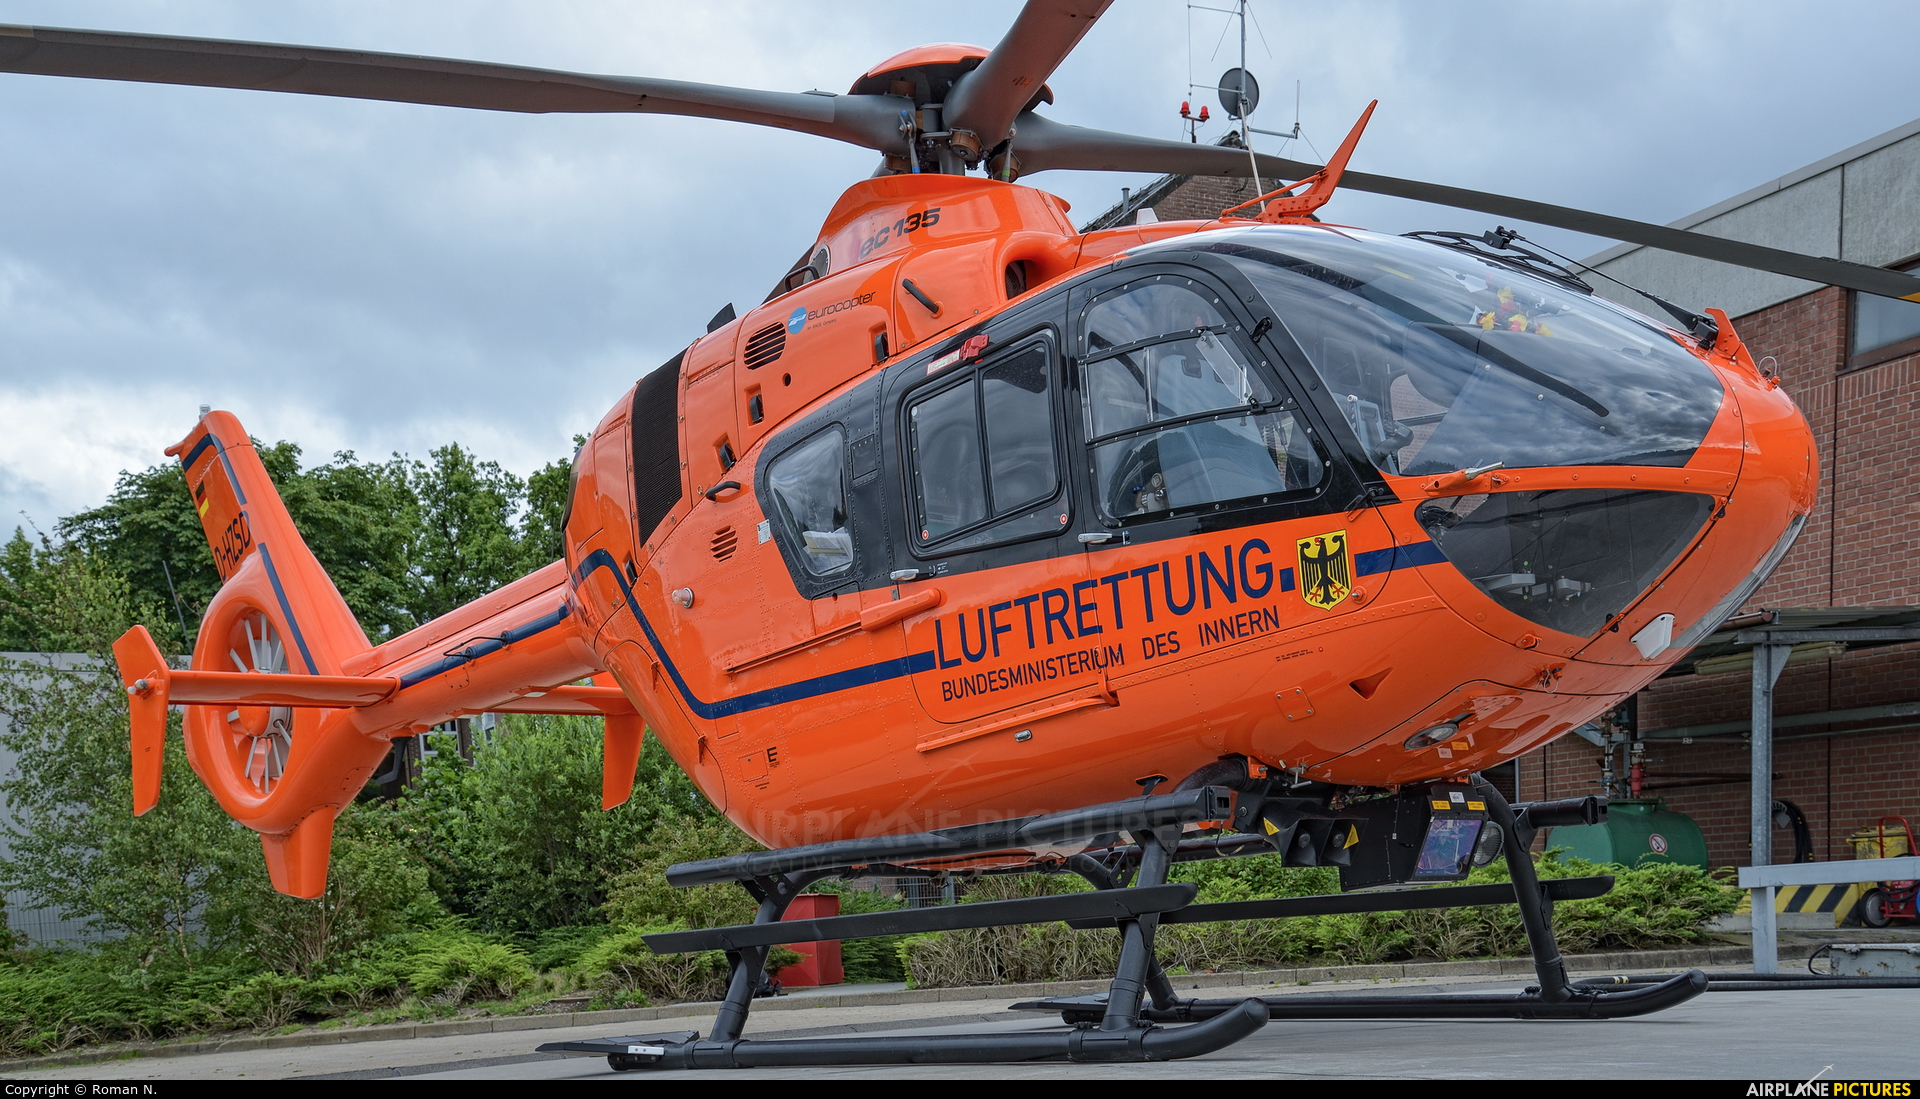 Luftrettung D-HZSD aircraft at Off Airport - Germany